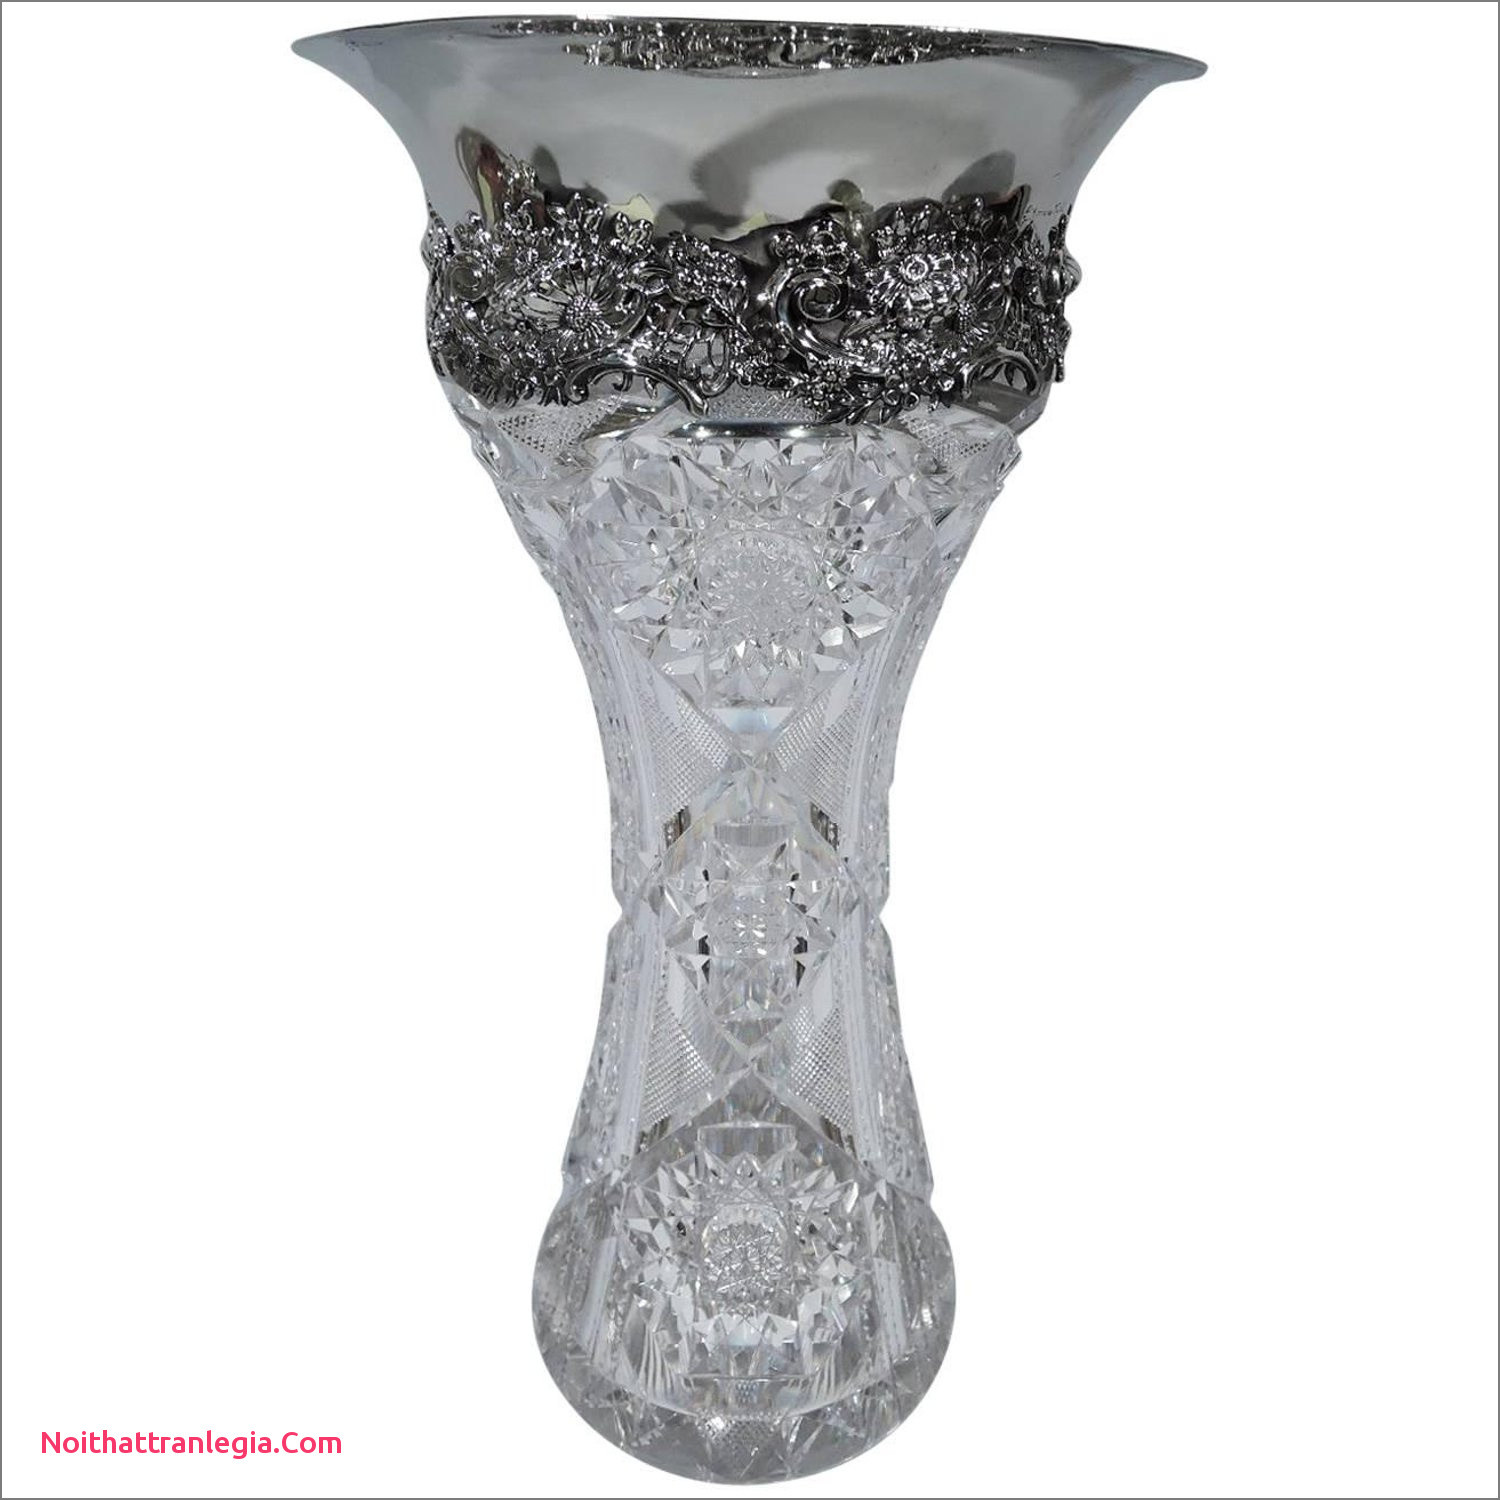 19 Fantastic Small Crystal Vase 2022 free download small crystal vase of 20 cut glass antique vase noithattranlegia vases design for antique brilliant cut glass and sterling silver vase by redlich for sale at 1stdibs